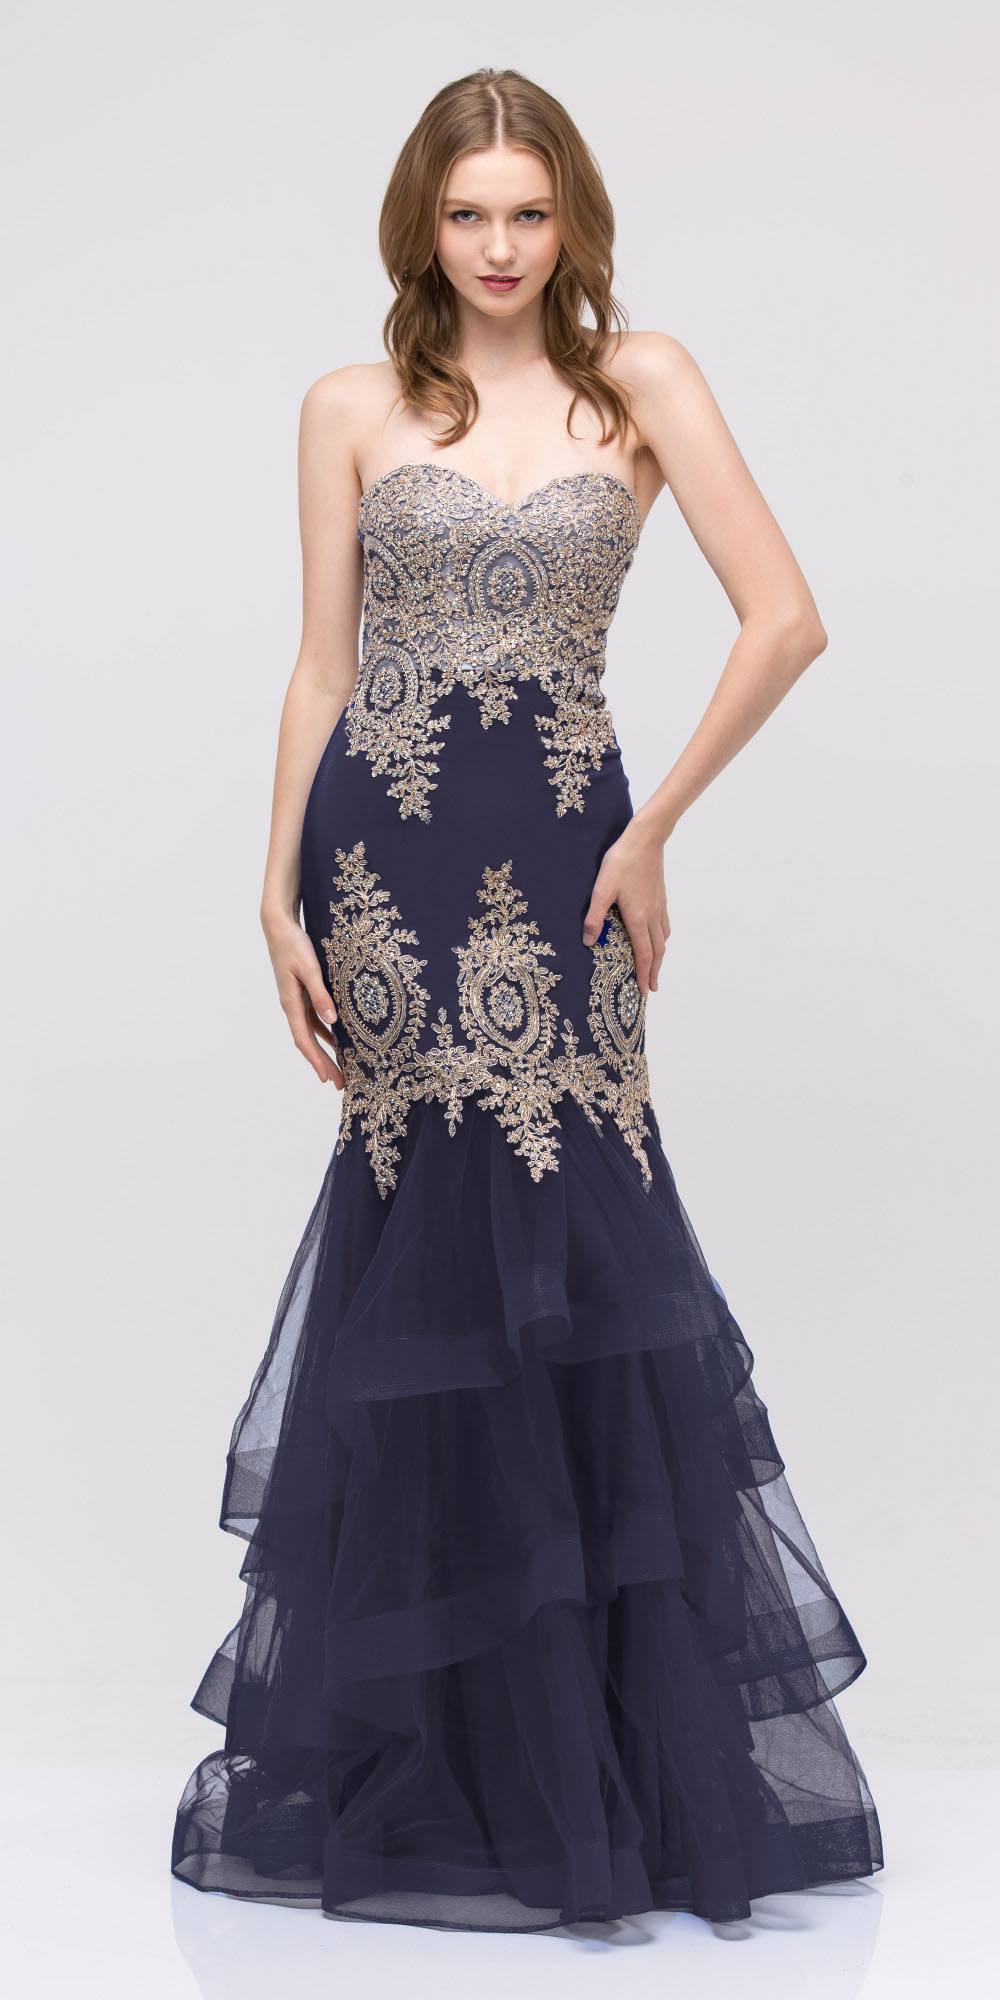 Eureka Fashion 6009 Strapless Embroidered Prom Gown Layered Skirt Sweetheart Neck Navy Blue